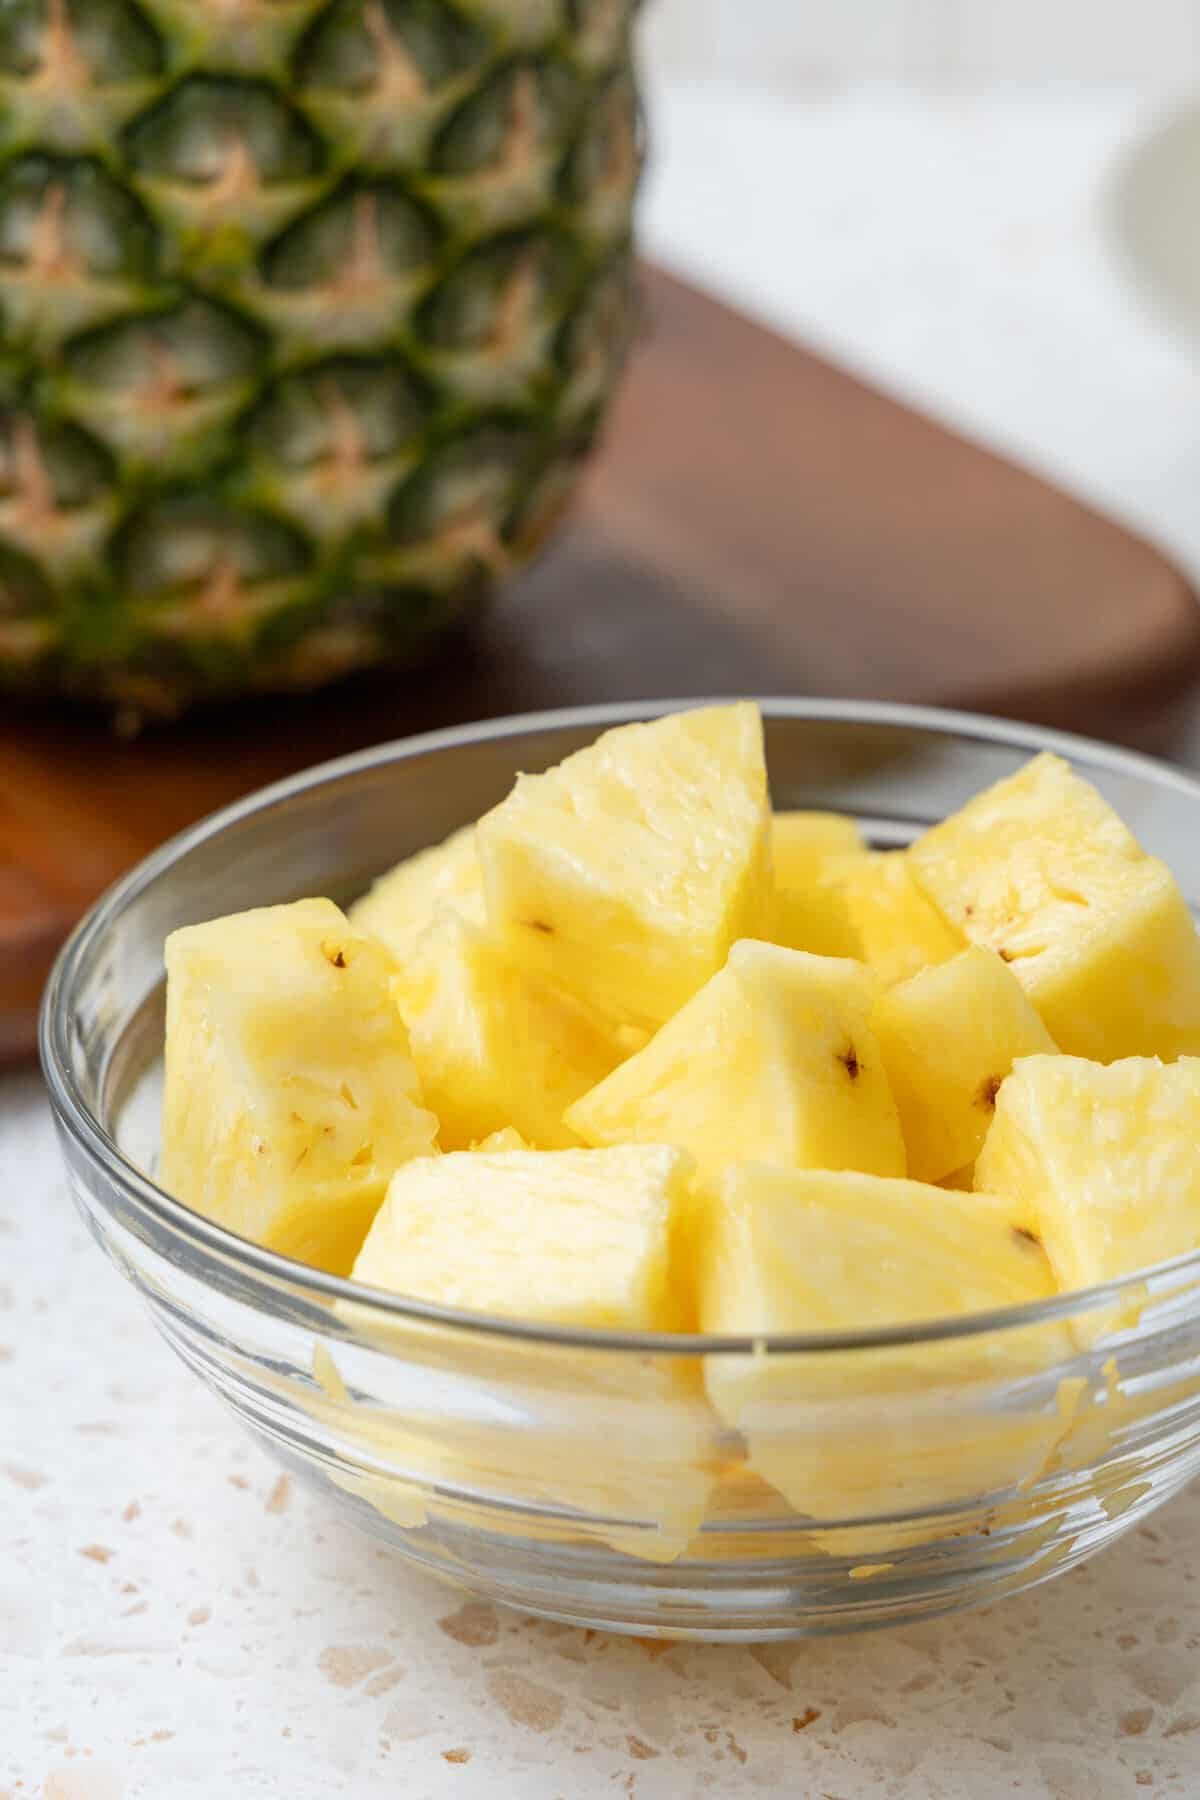 Pineapple slices in a glass bowl.